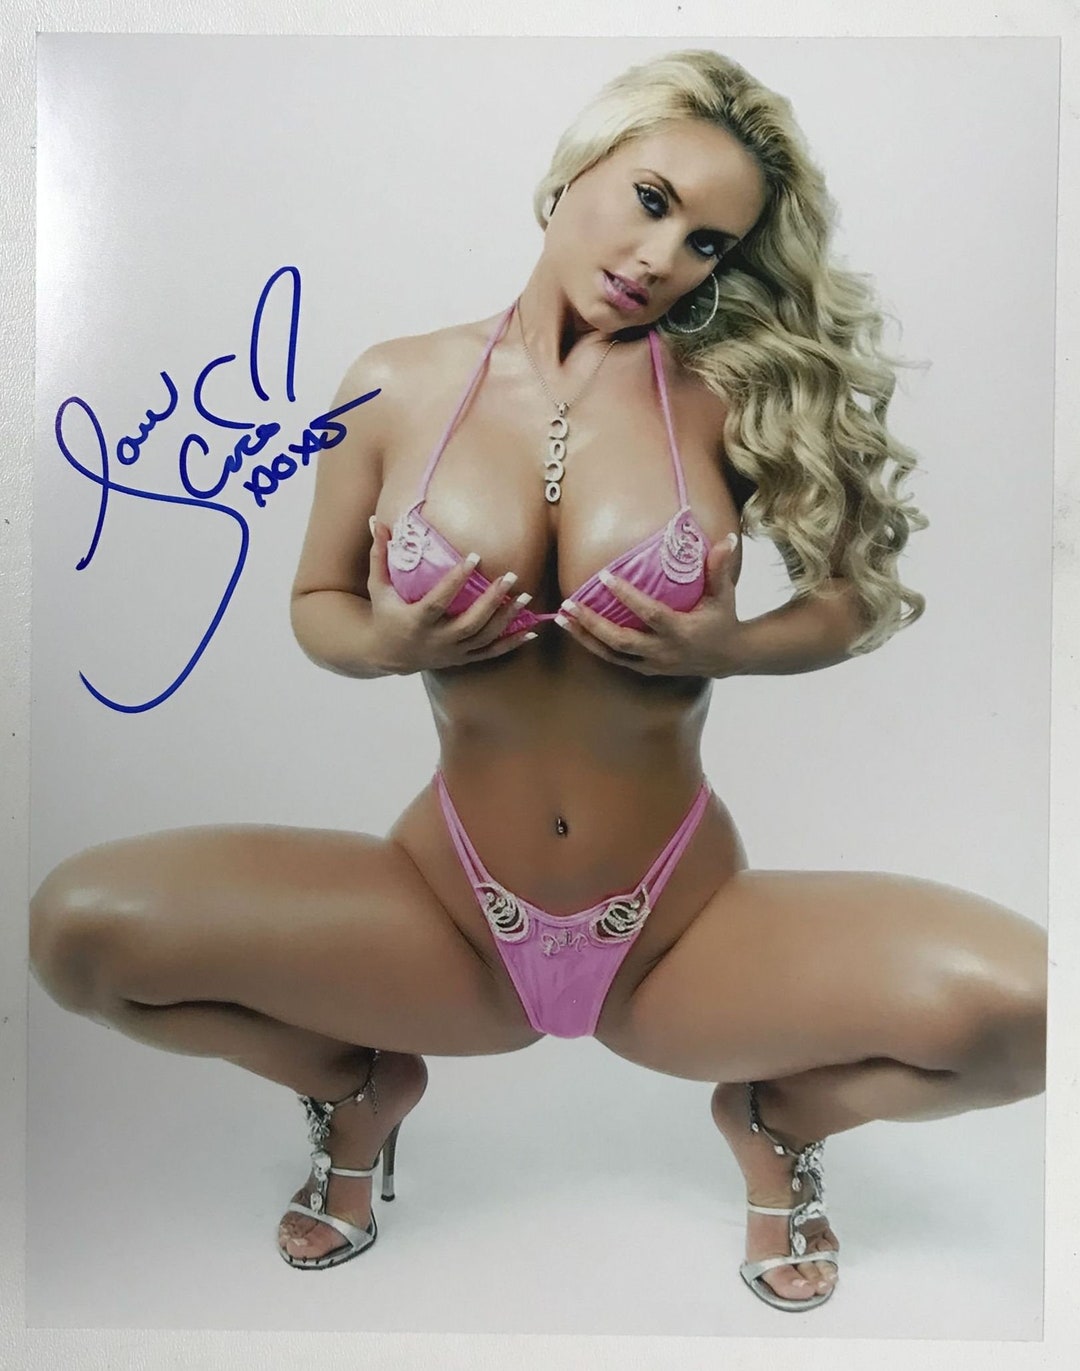 Coco Austin Signed Autographed Glossy 11x14 Photo picture picture